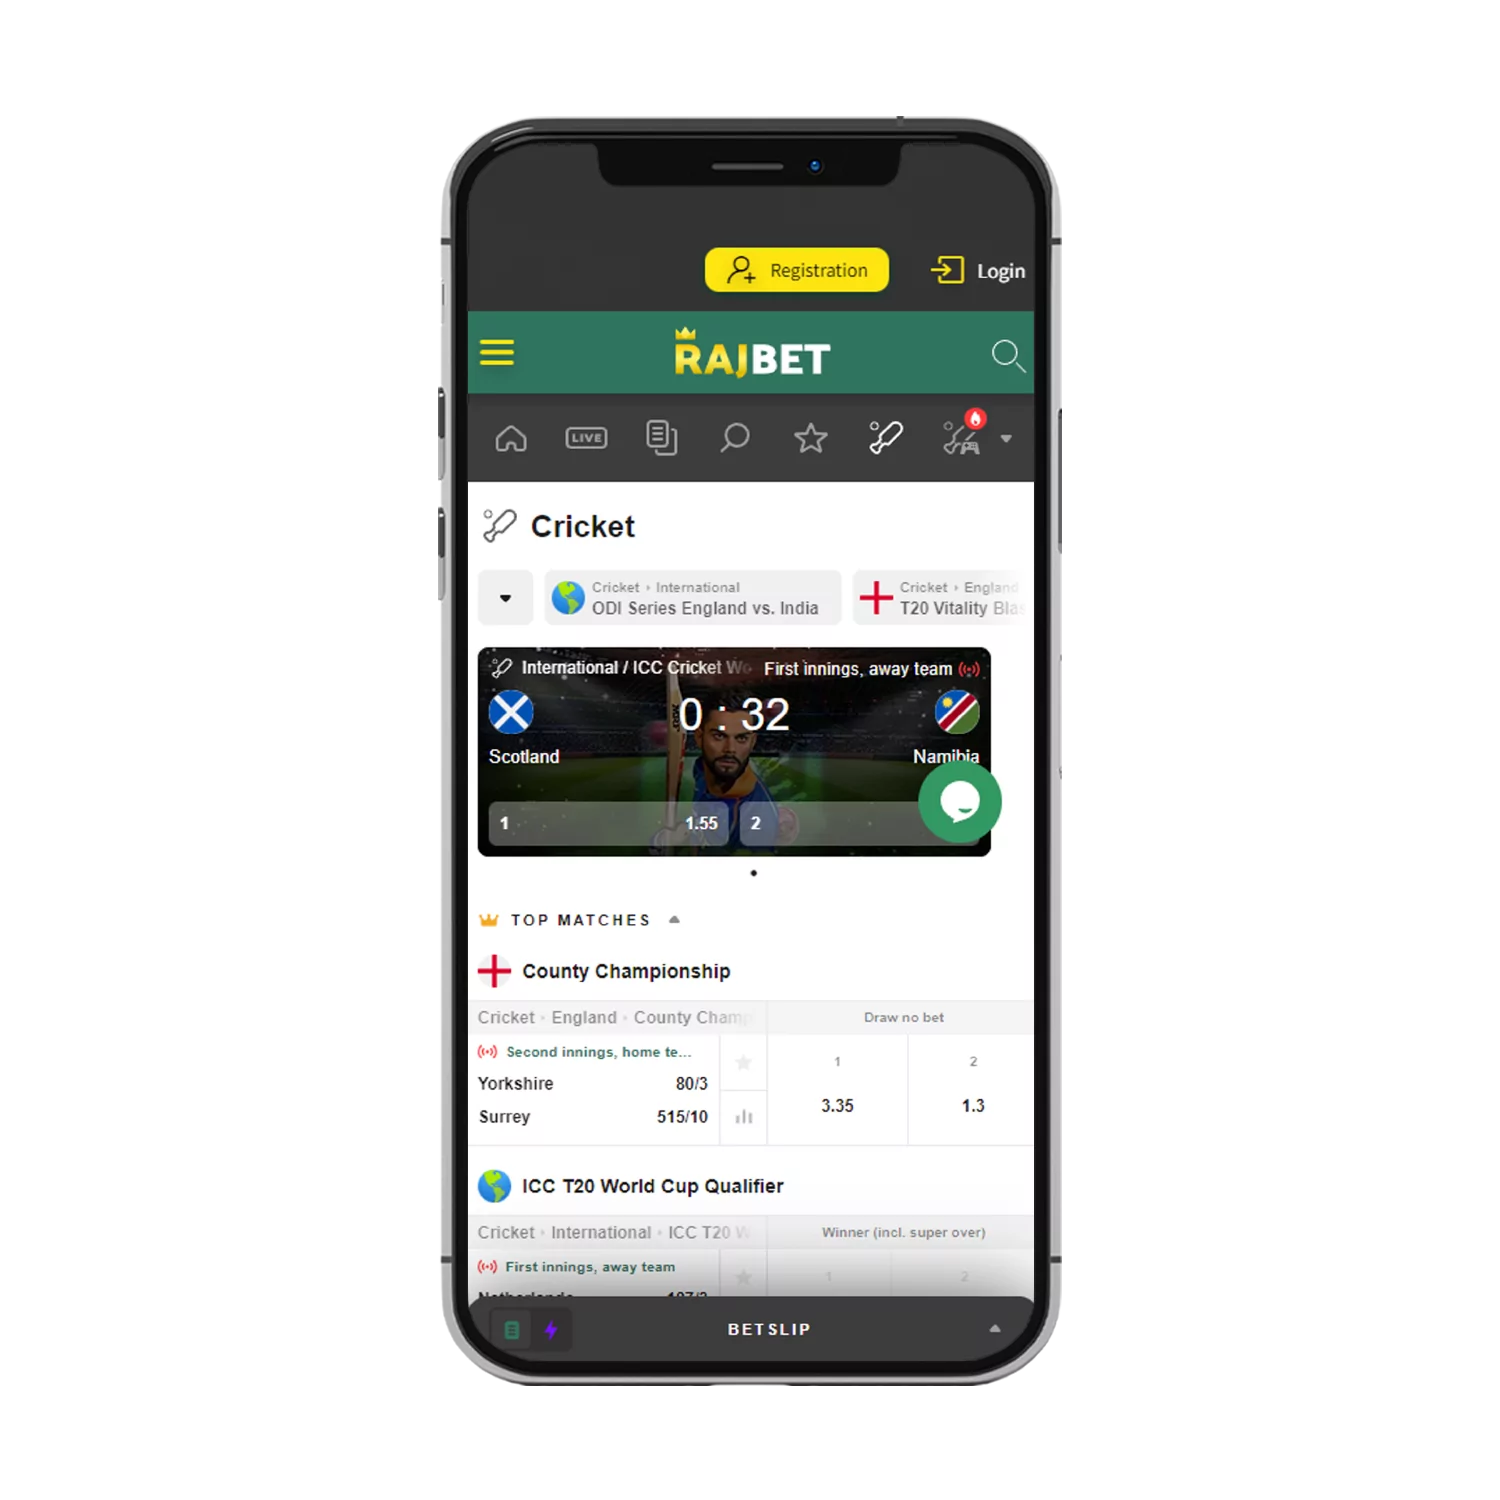 Rajbet is a popular betting app working in India.